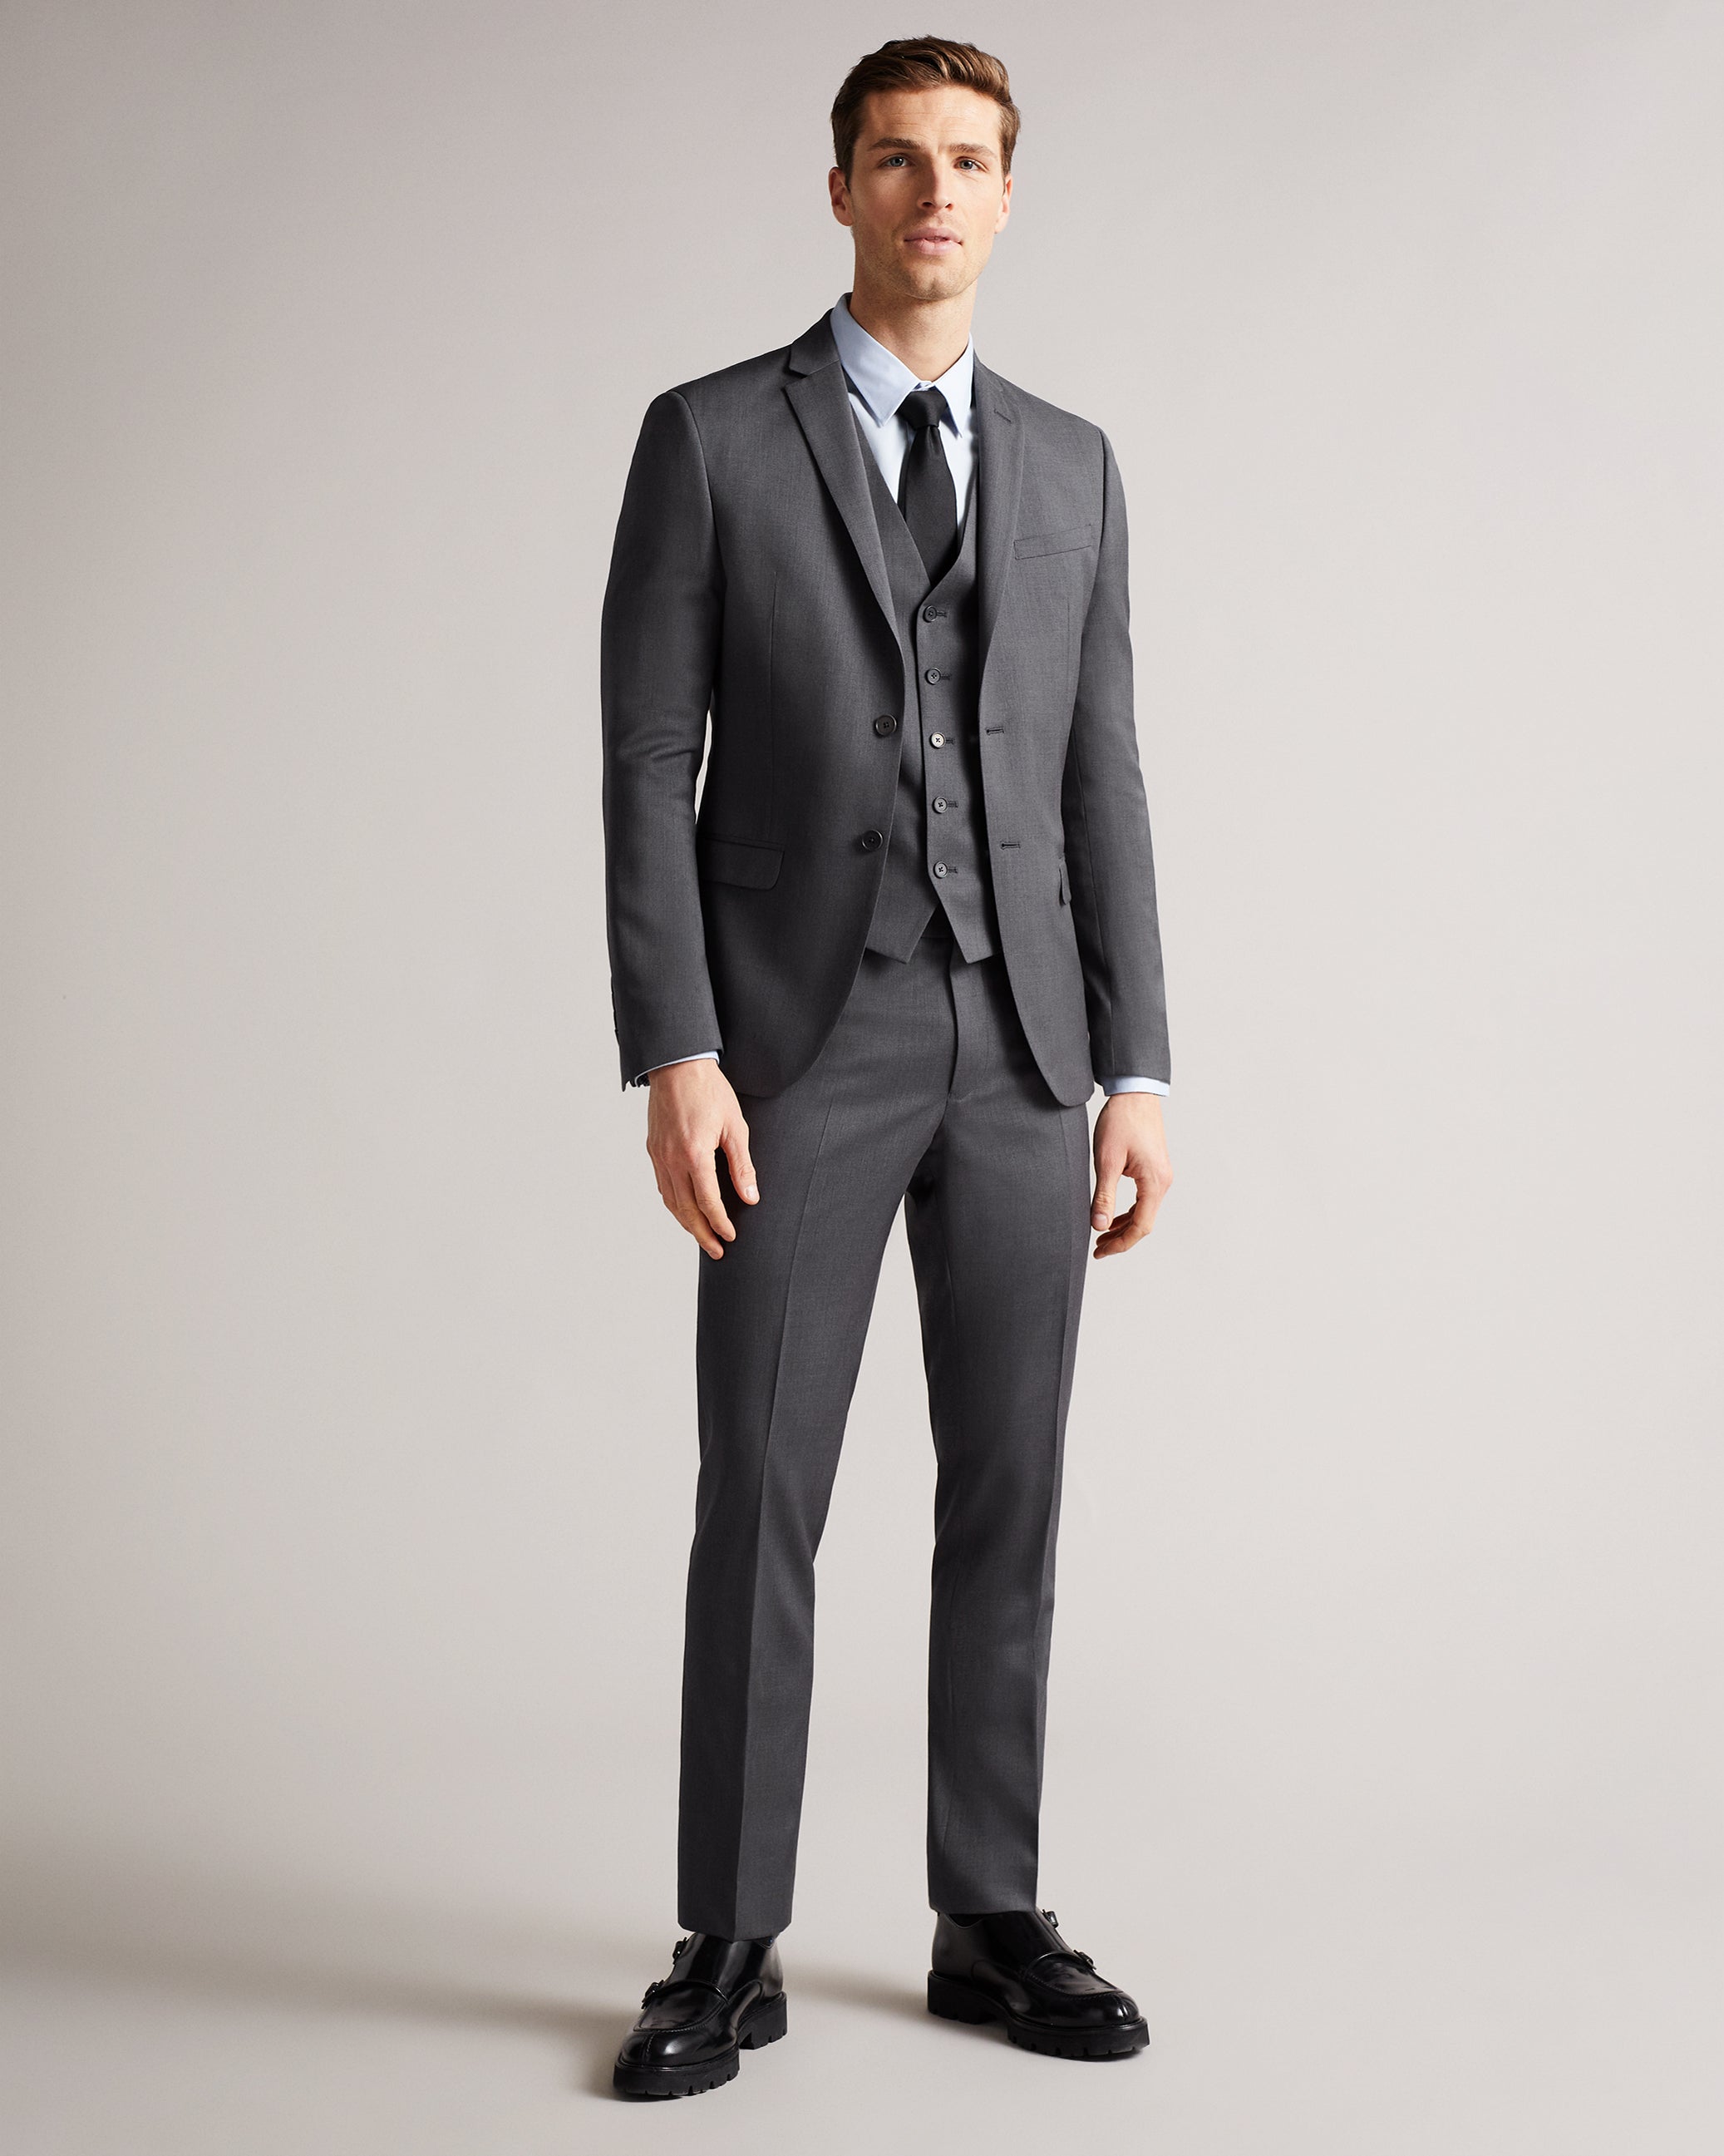 Irvints Slim Fit Charcoal Twill Suit Trousers Charcoal